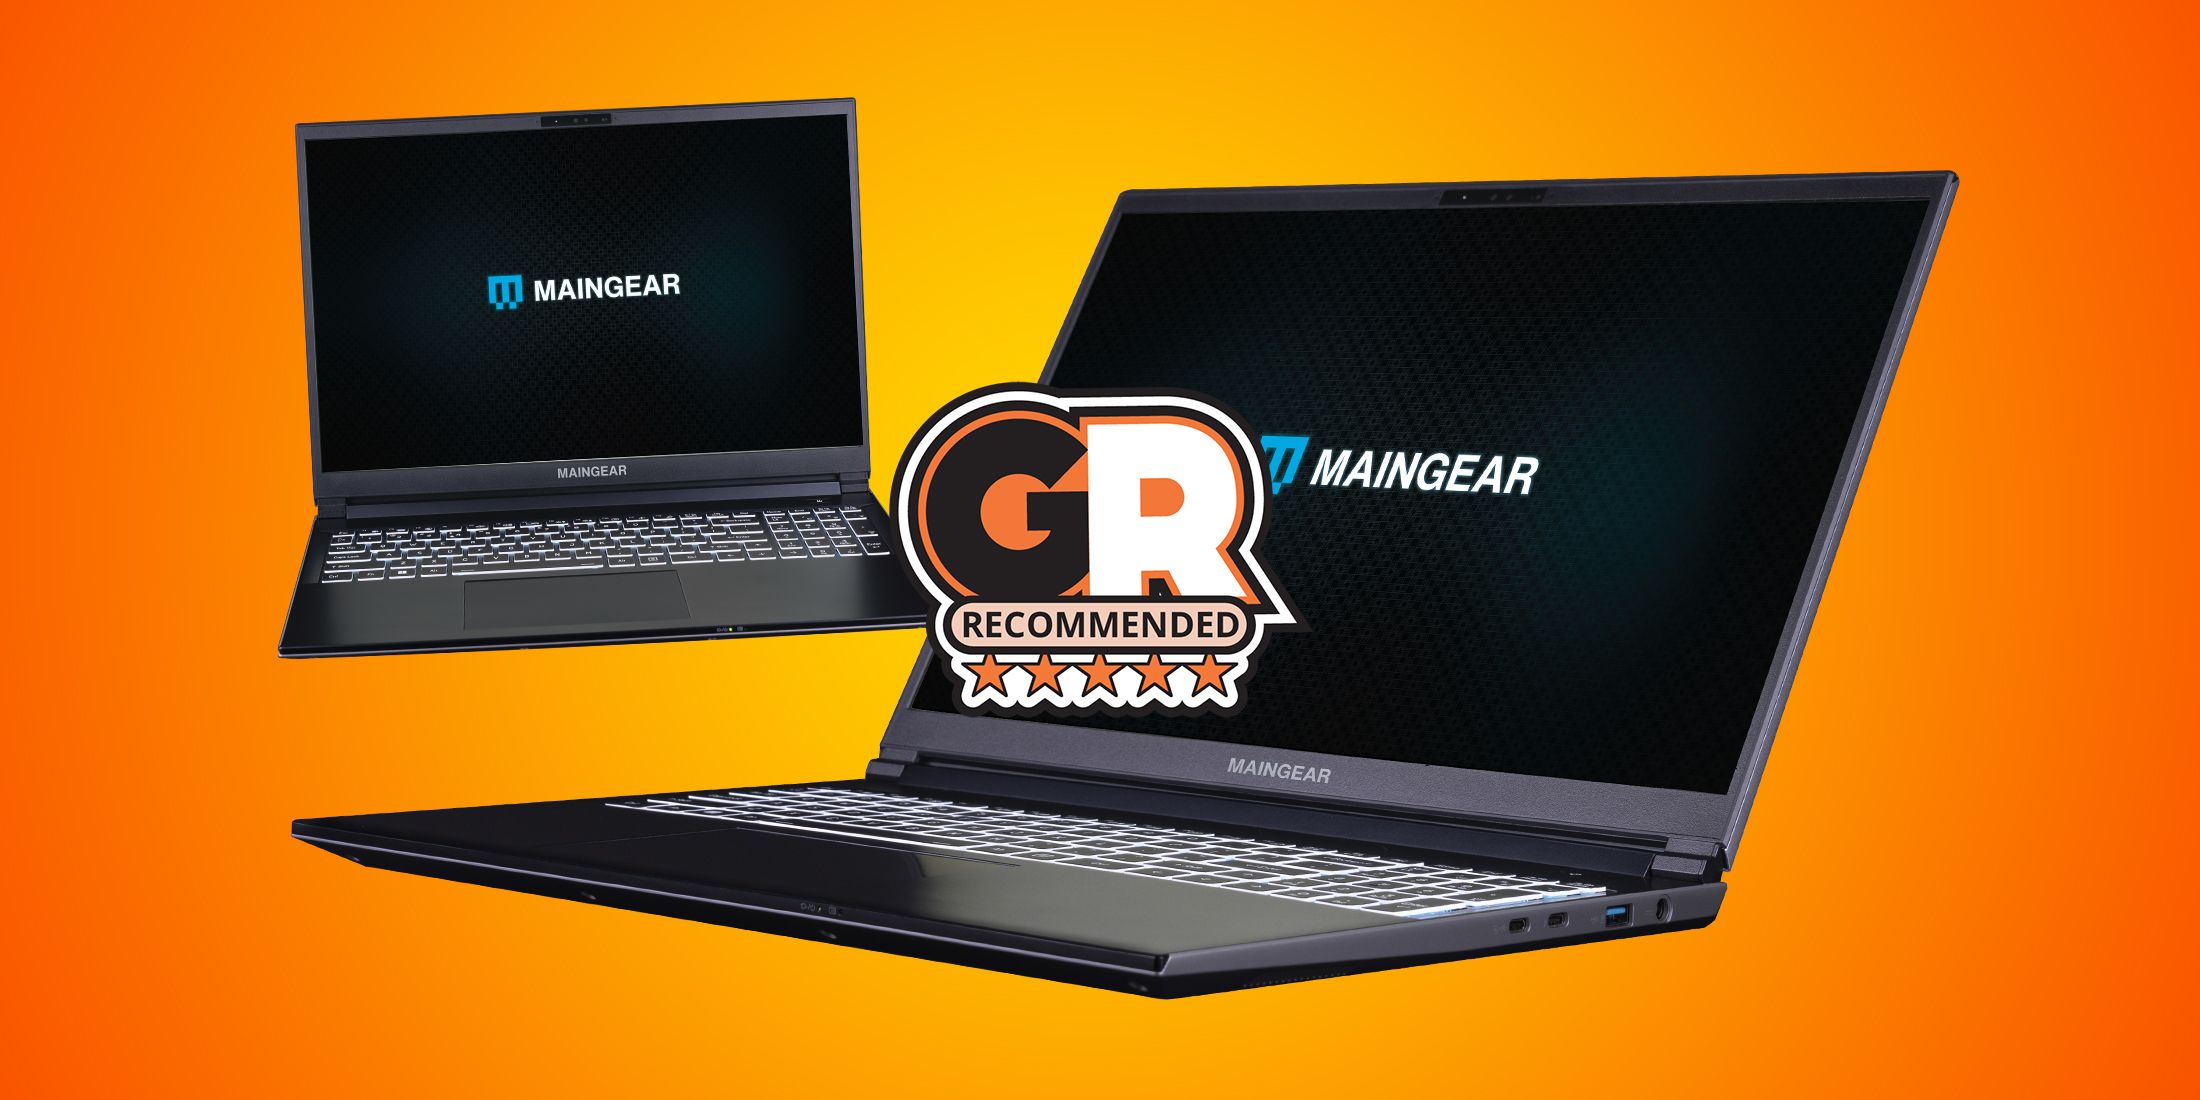 Everything You Need To Know About The New MAINGEAR ML-16 Gaming Laptops